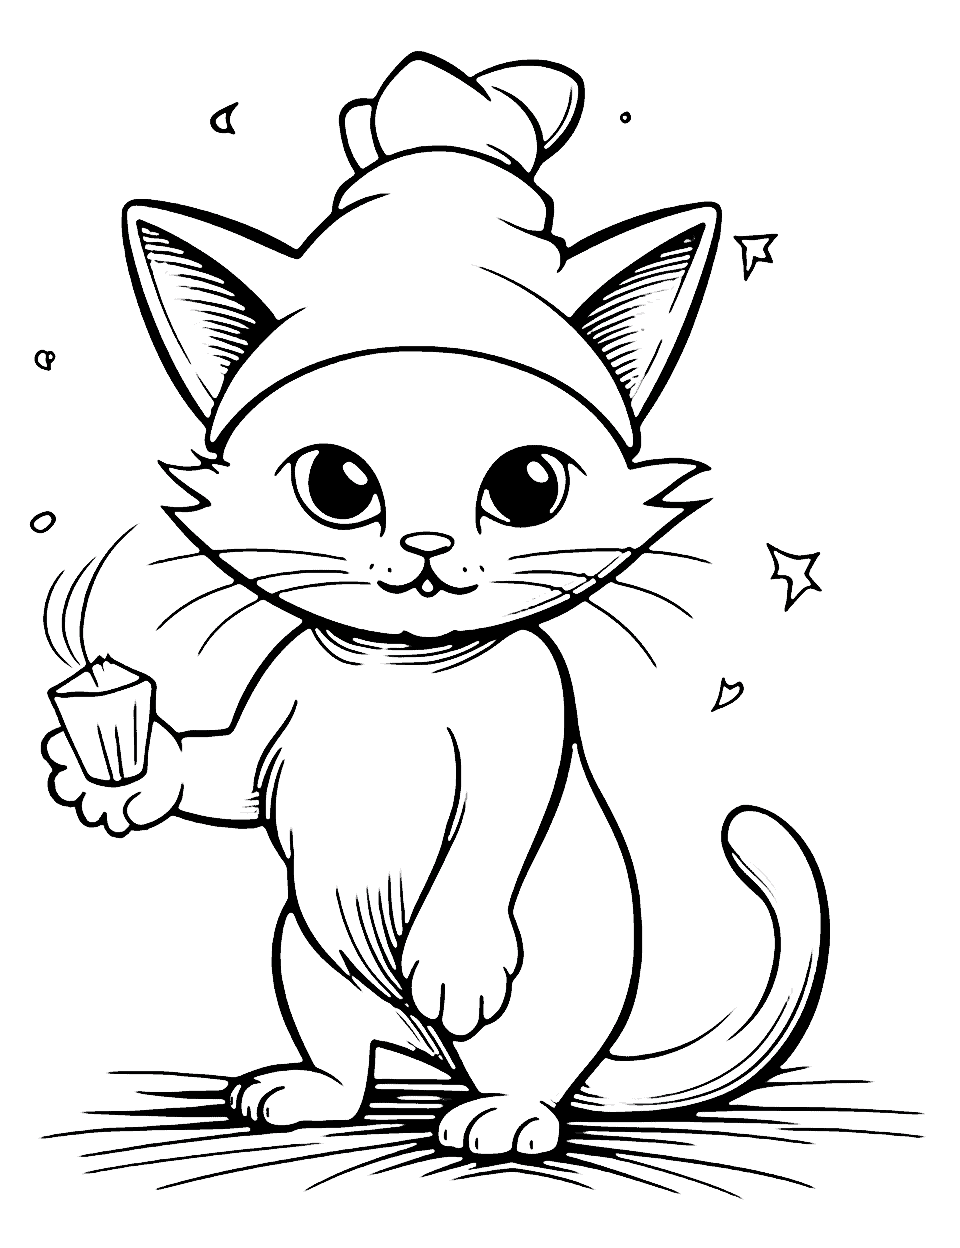 Anime Cat Magician Casting Spells Coloring Page - A sleek anime cat casting magical spells with a twinkle in its eyes.